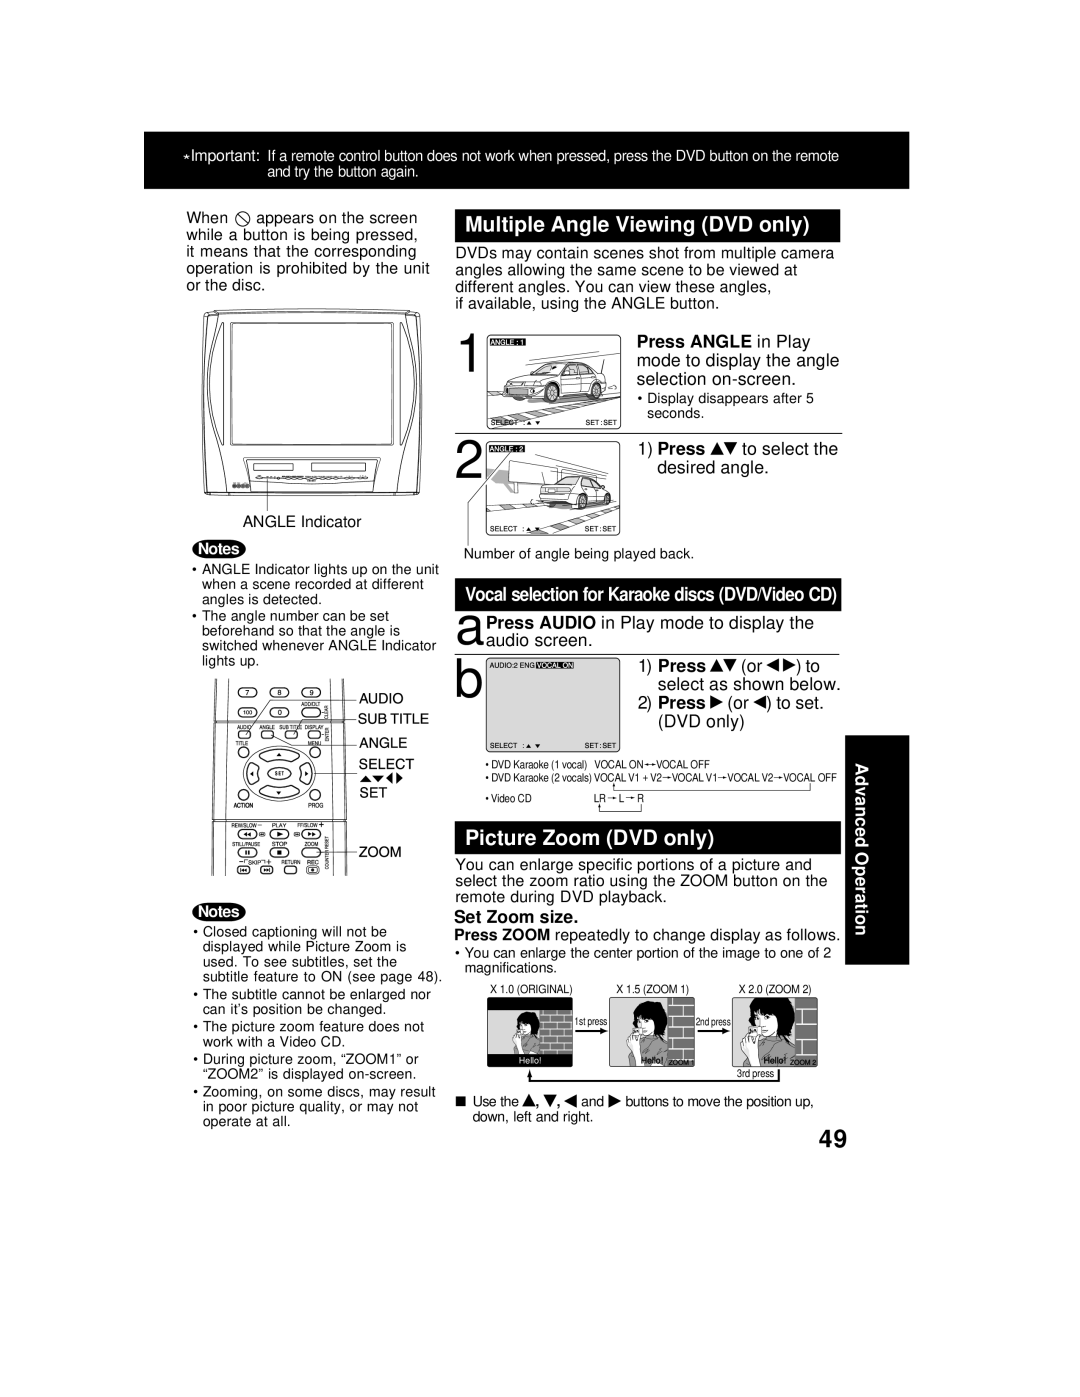 Panasonic AG 527DVDE manual Multiple Angle Viewing DVD only, Picture Zoom DVD only, Press ANGLE in Play, Set Zoom size 